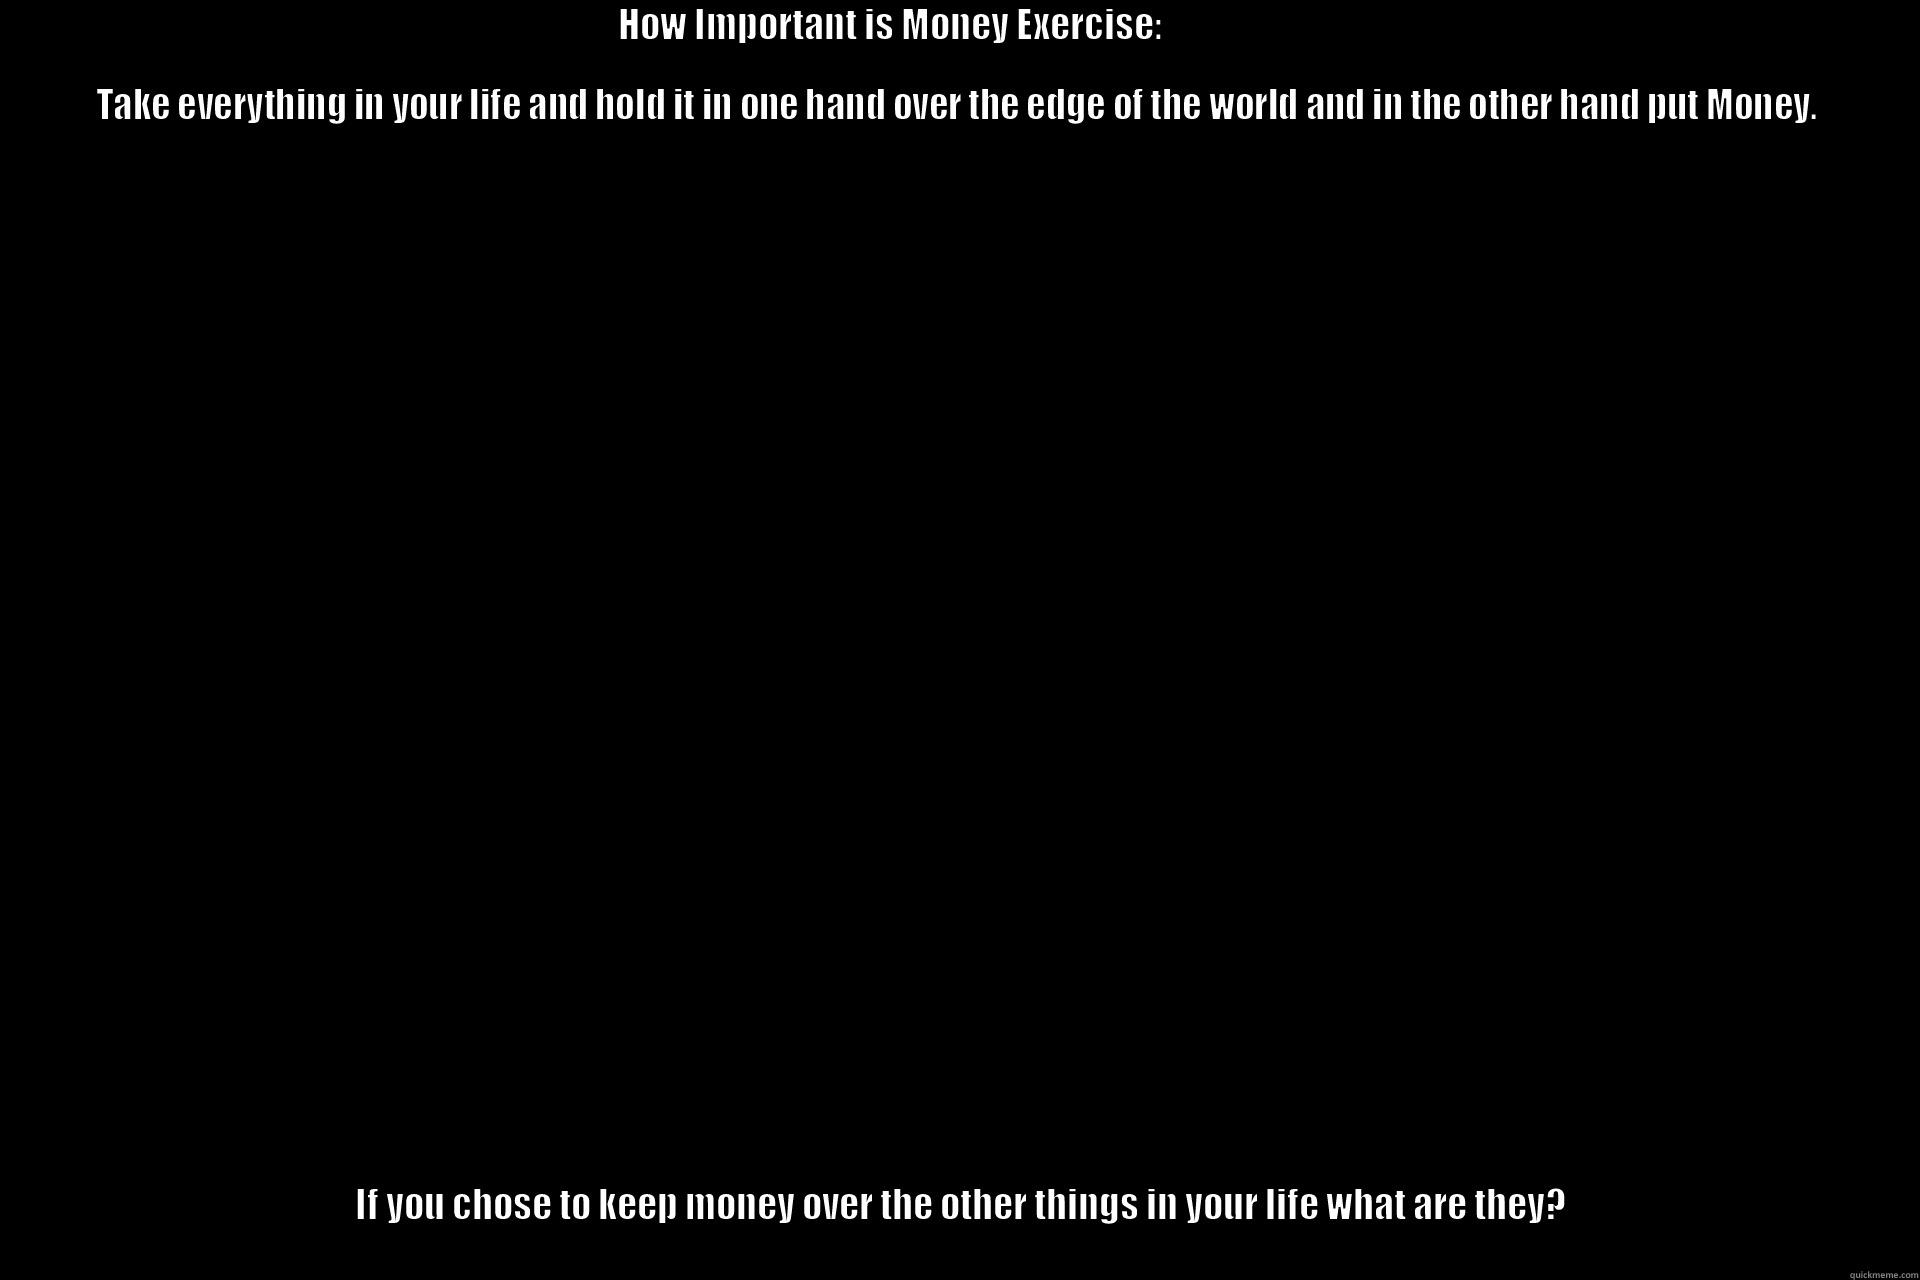                                                                                         HOW IMPORTANT IS MONEY EXERCISE:                                                                                                                                         IF YOU CHOSE TO KEEP MONEY OVER THE OTHER THINGS IN YOUR LIFE WHAT ARE THEY?                                                                                                                                                                                   Misc